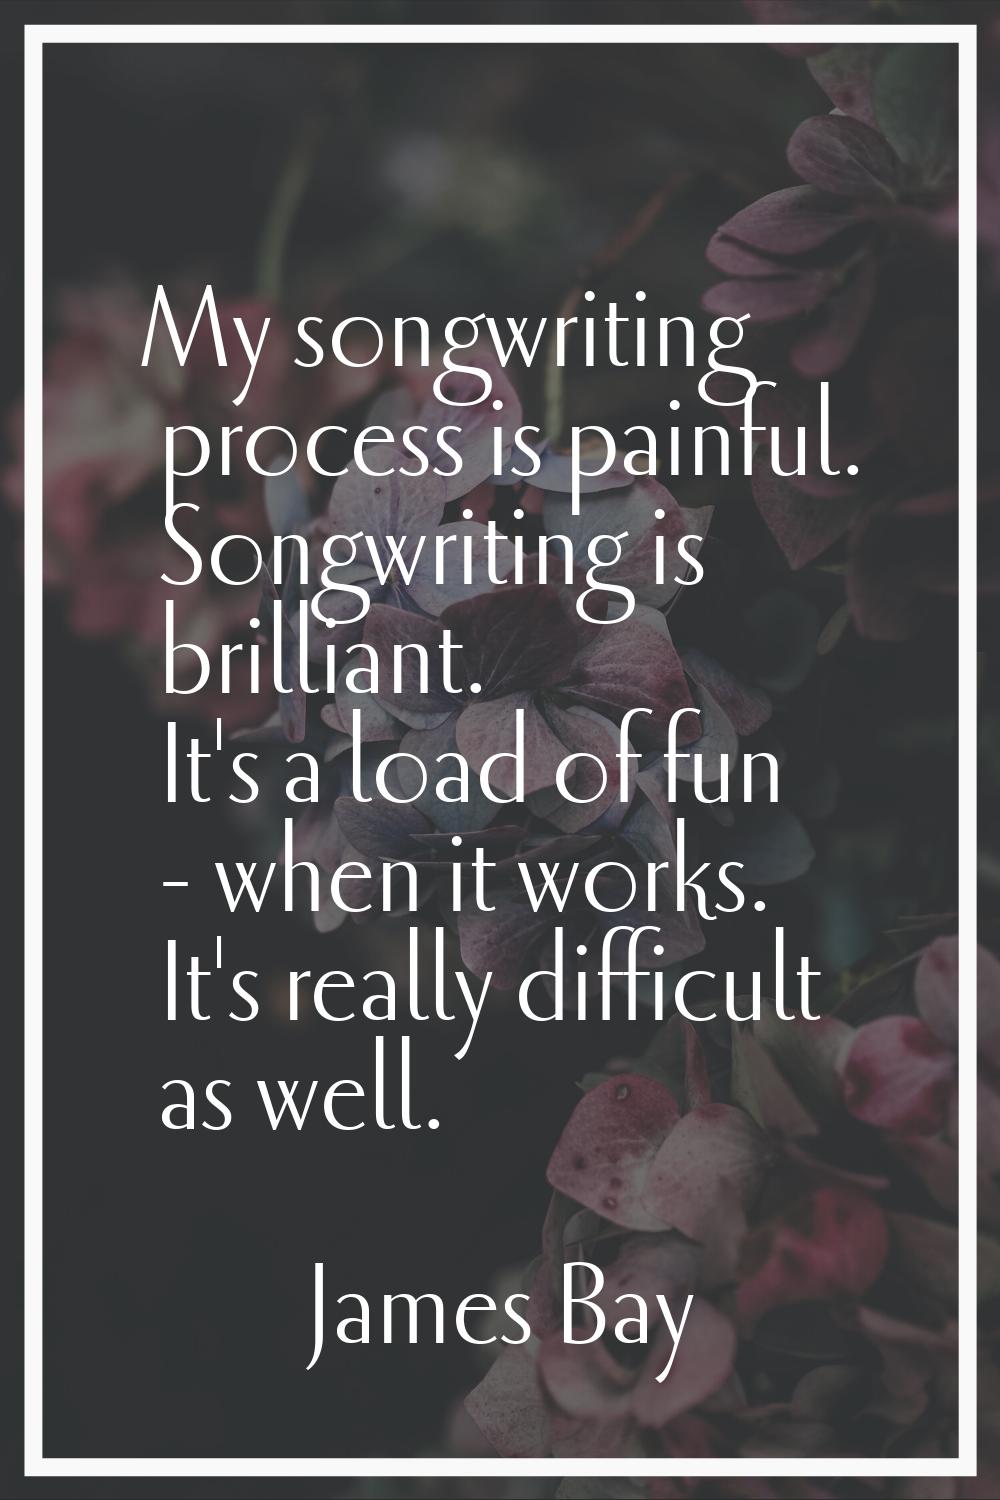 My songwriting process is painful. Songwriting is brilliant. It's a load of fun - when it works. It